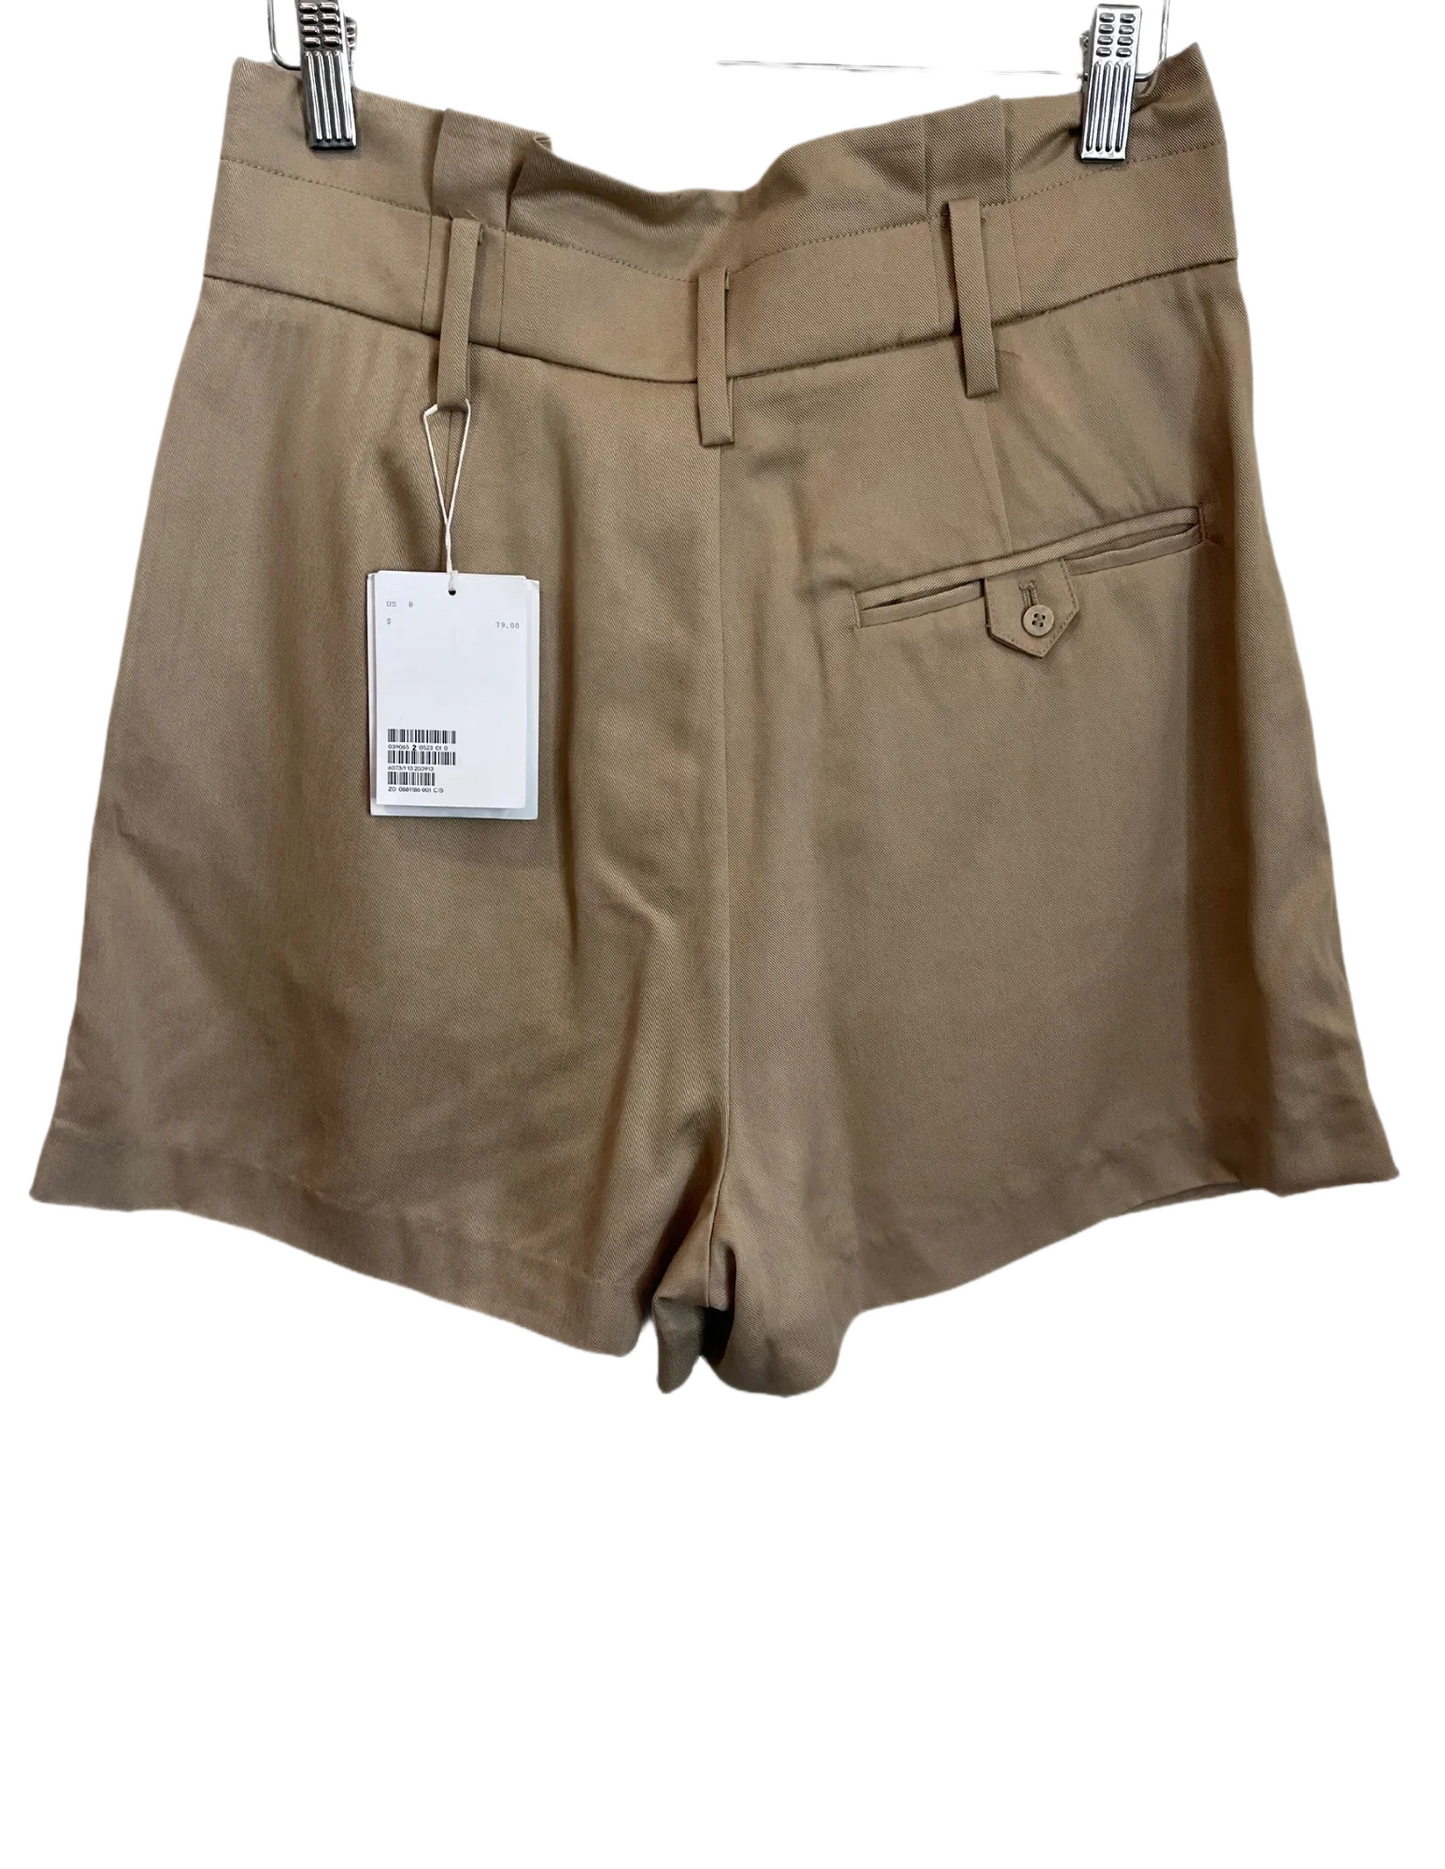 & Other Stories Linen Shorts NWT - 8